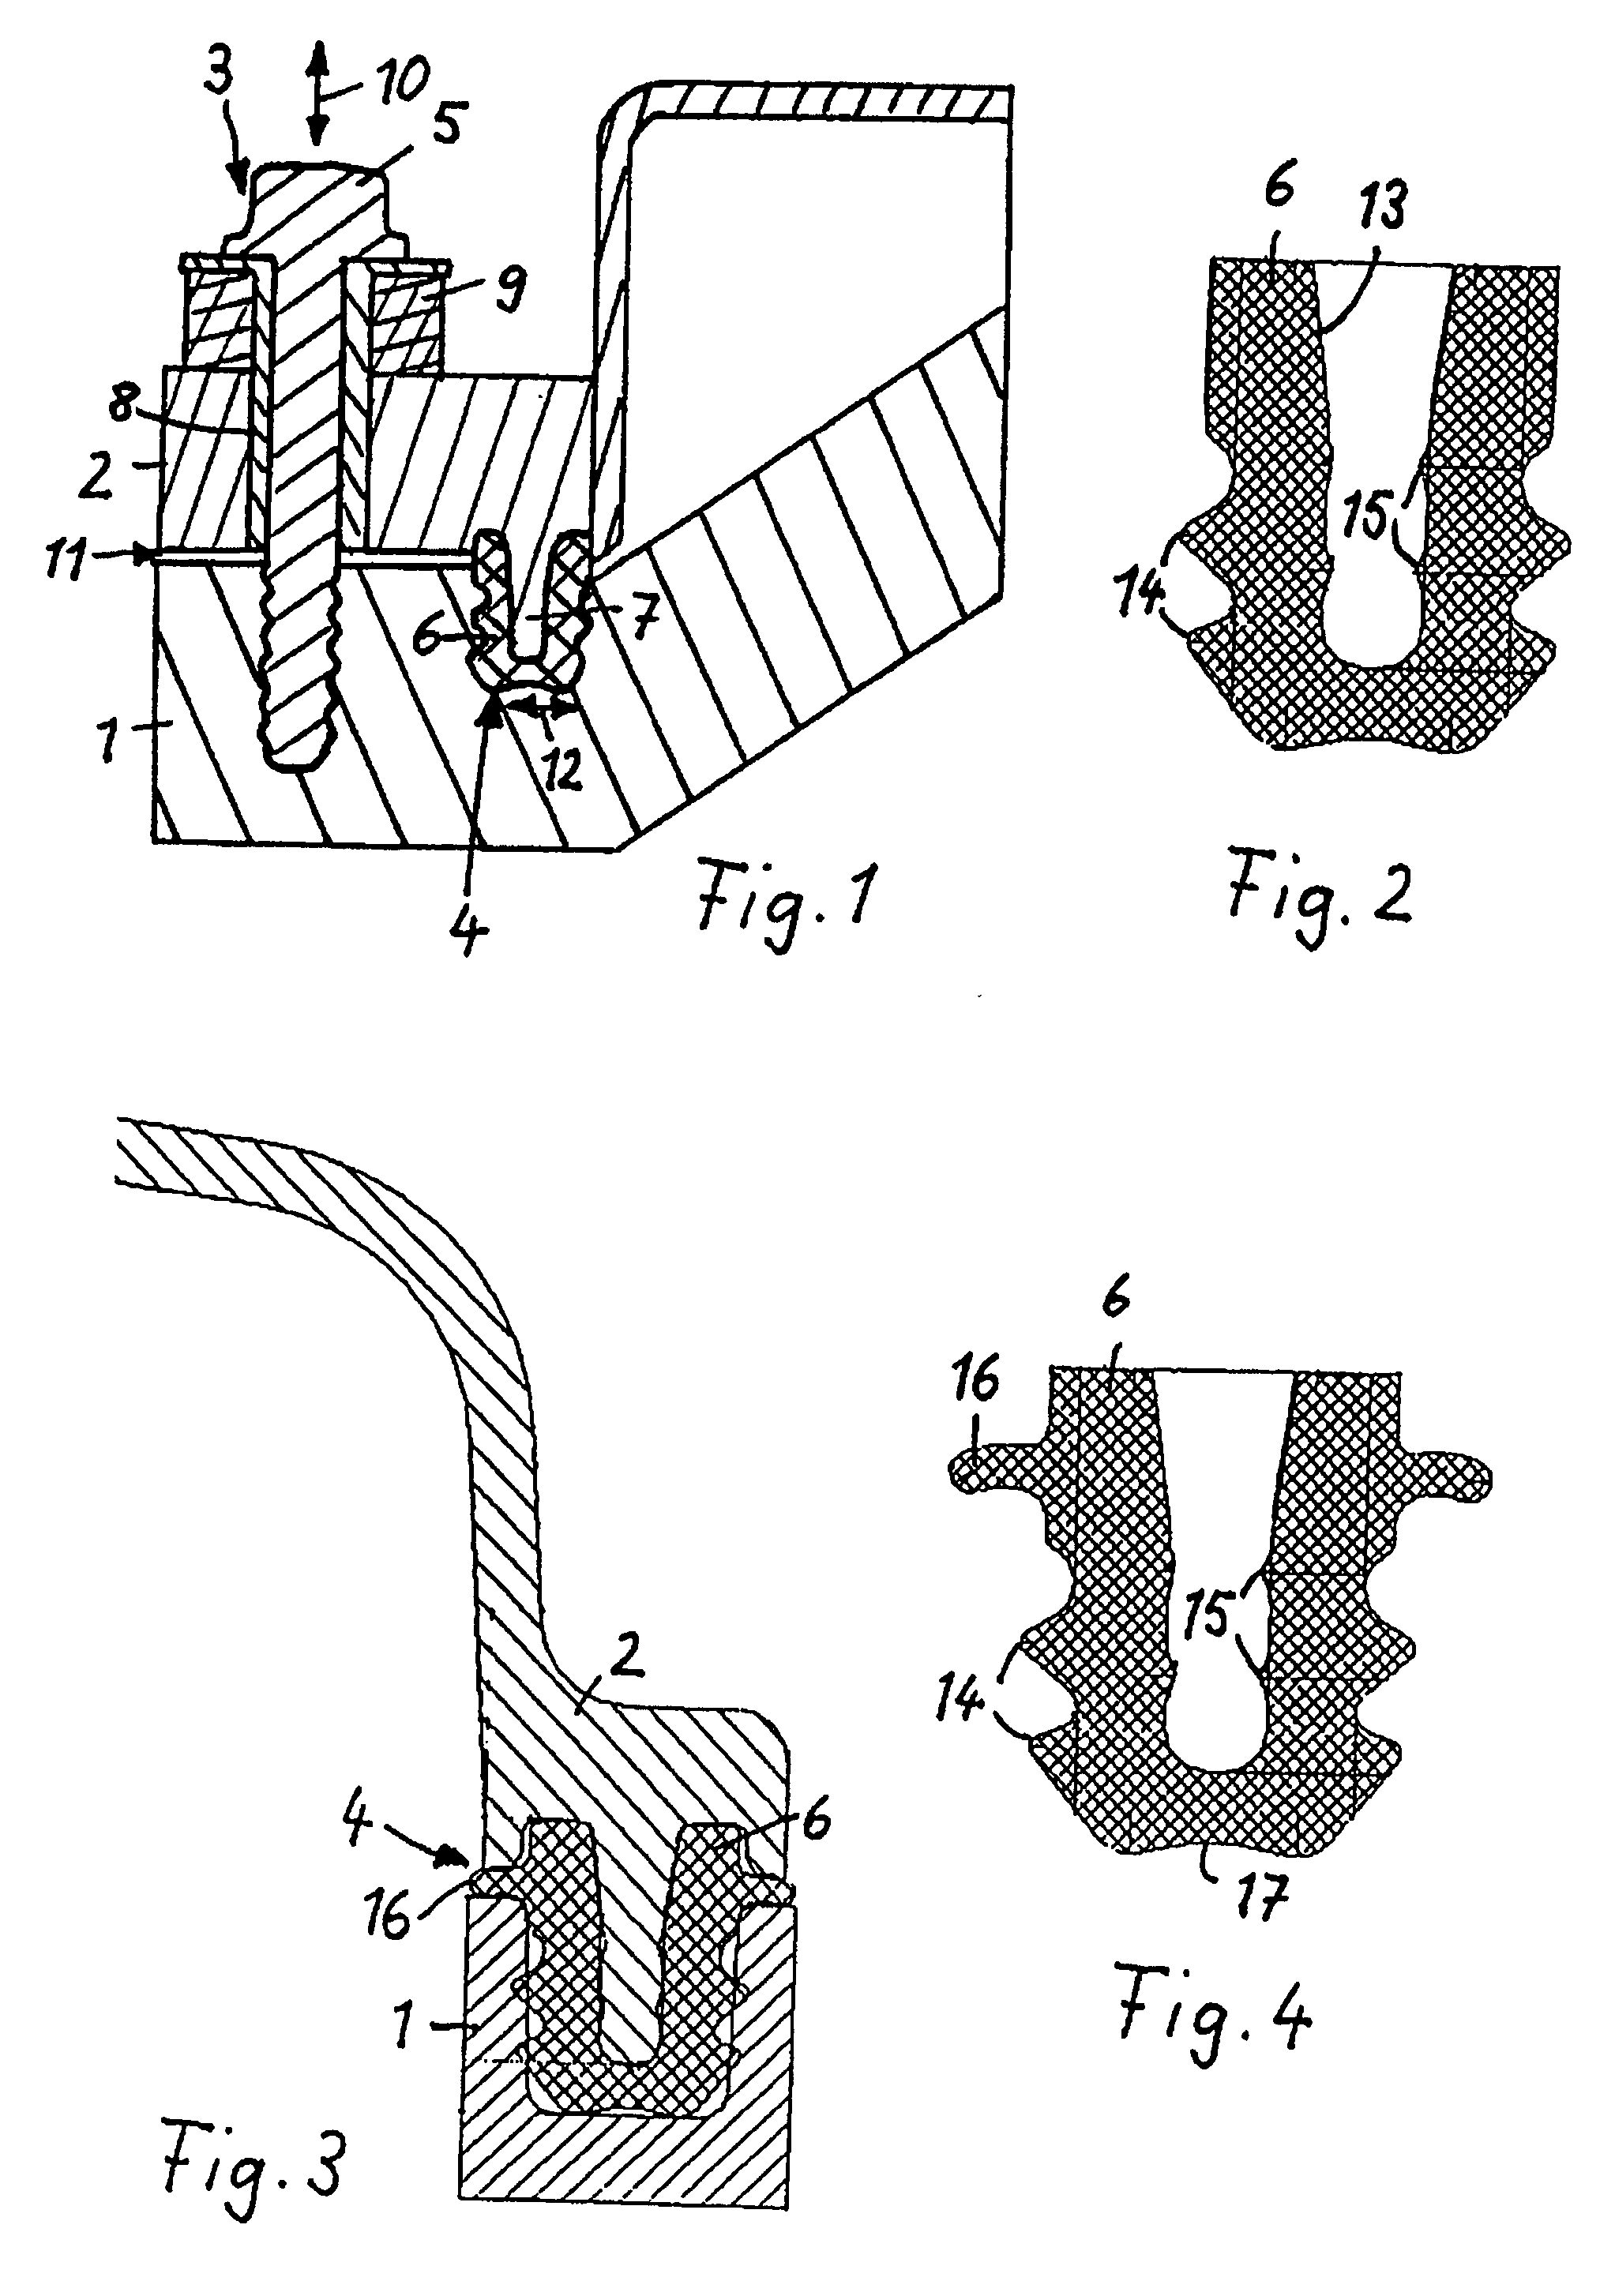 Cylinder head cover for a cylinder head of an internal combustion engine